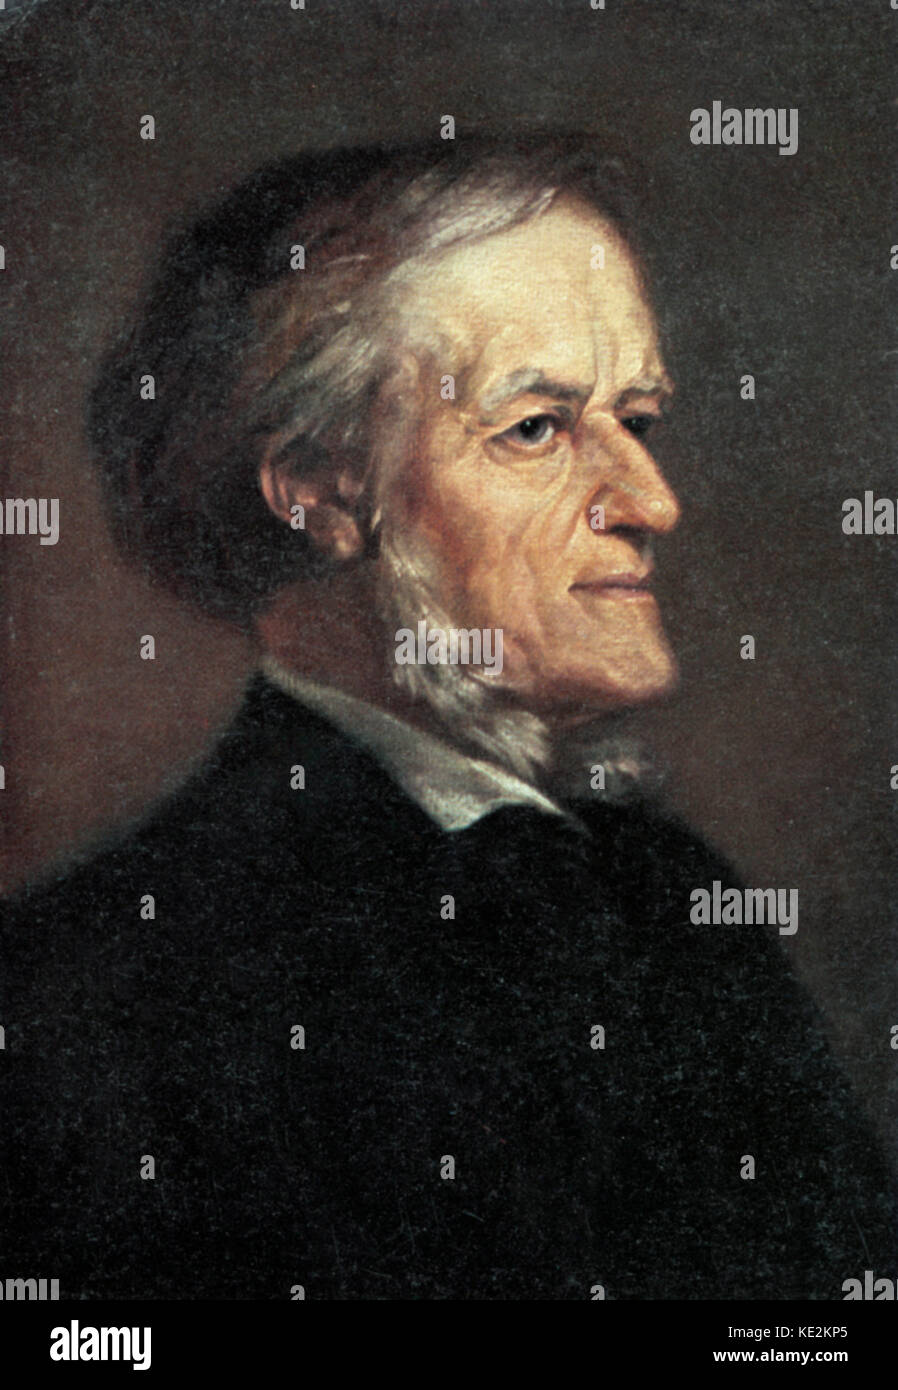 Richard Wagner portrait. Painting. German composer & author, 22 May 1813 - 13 February 1883. Stock Photo